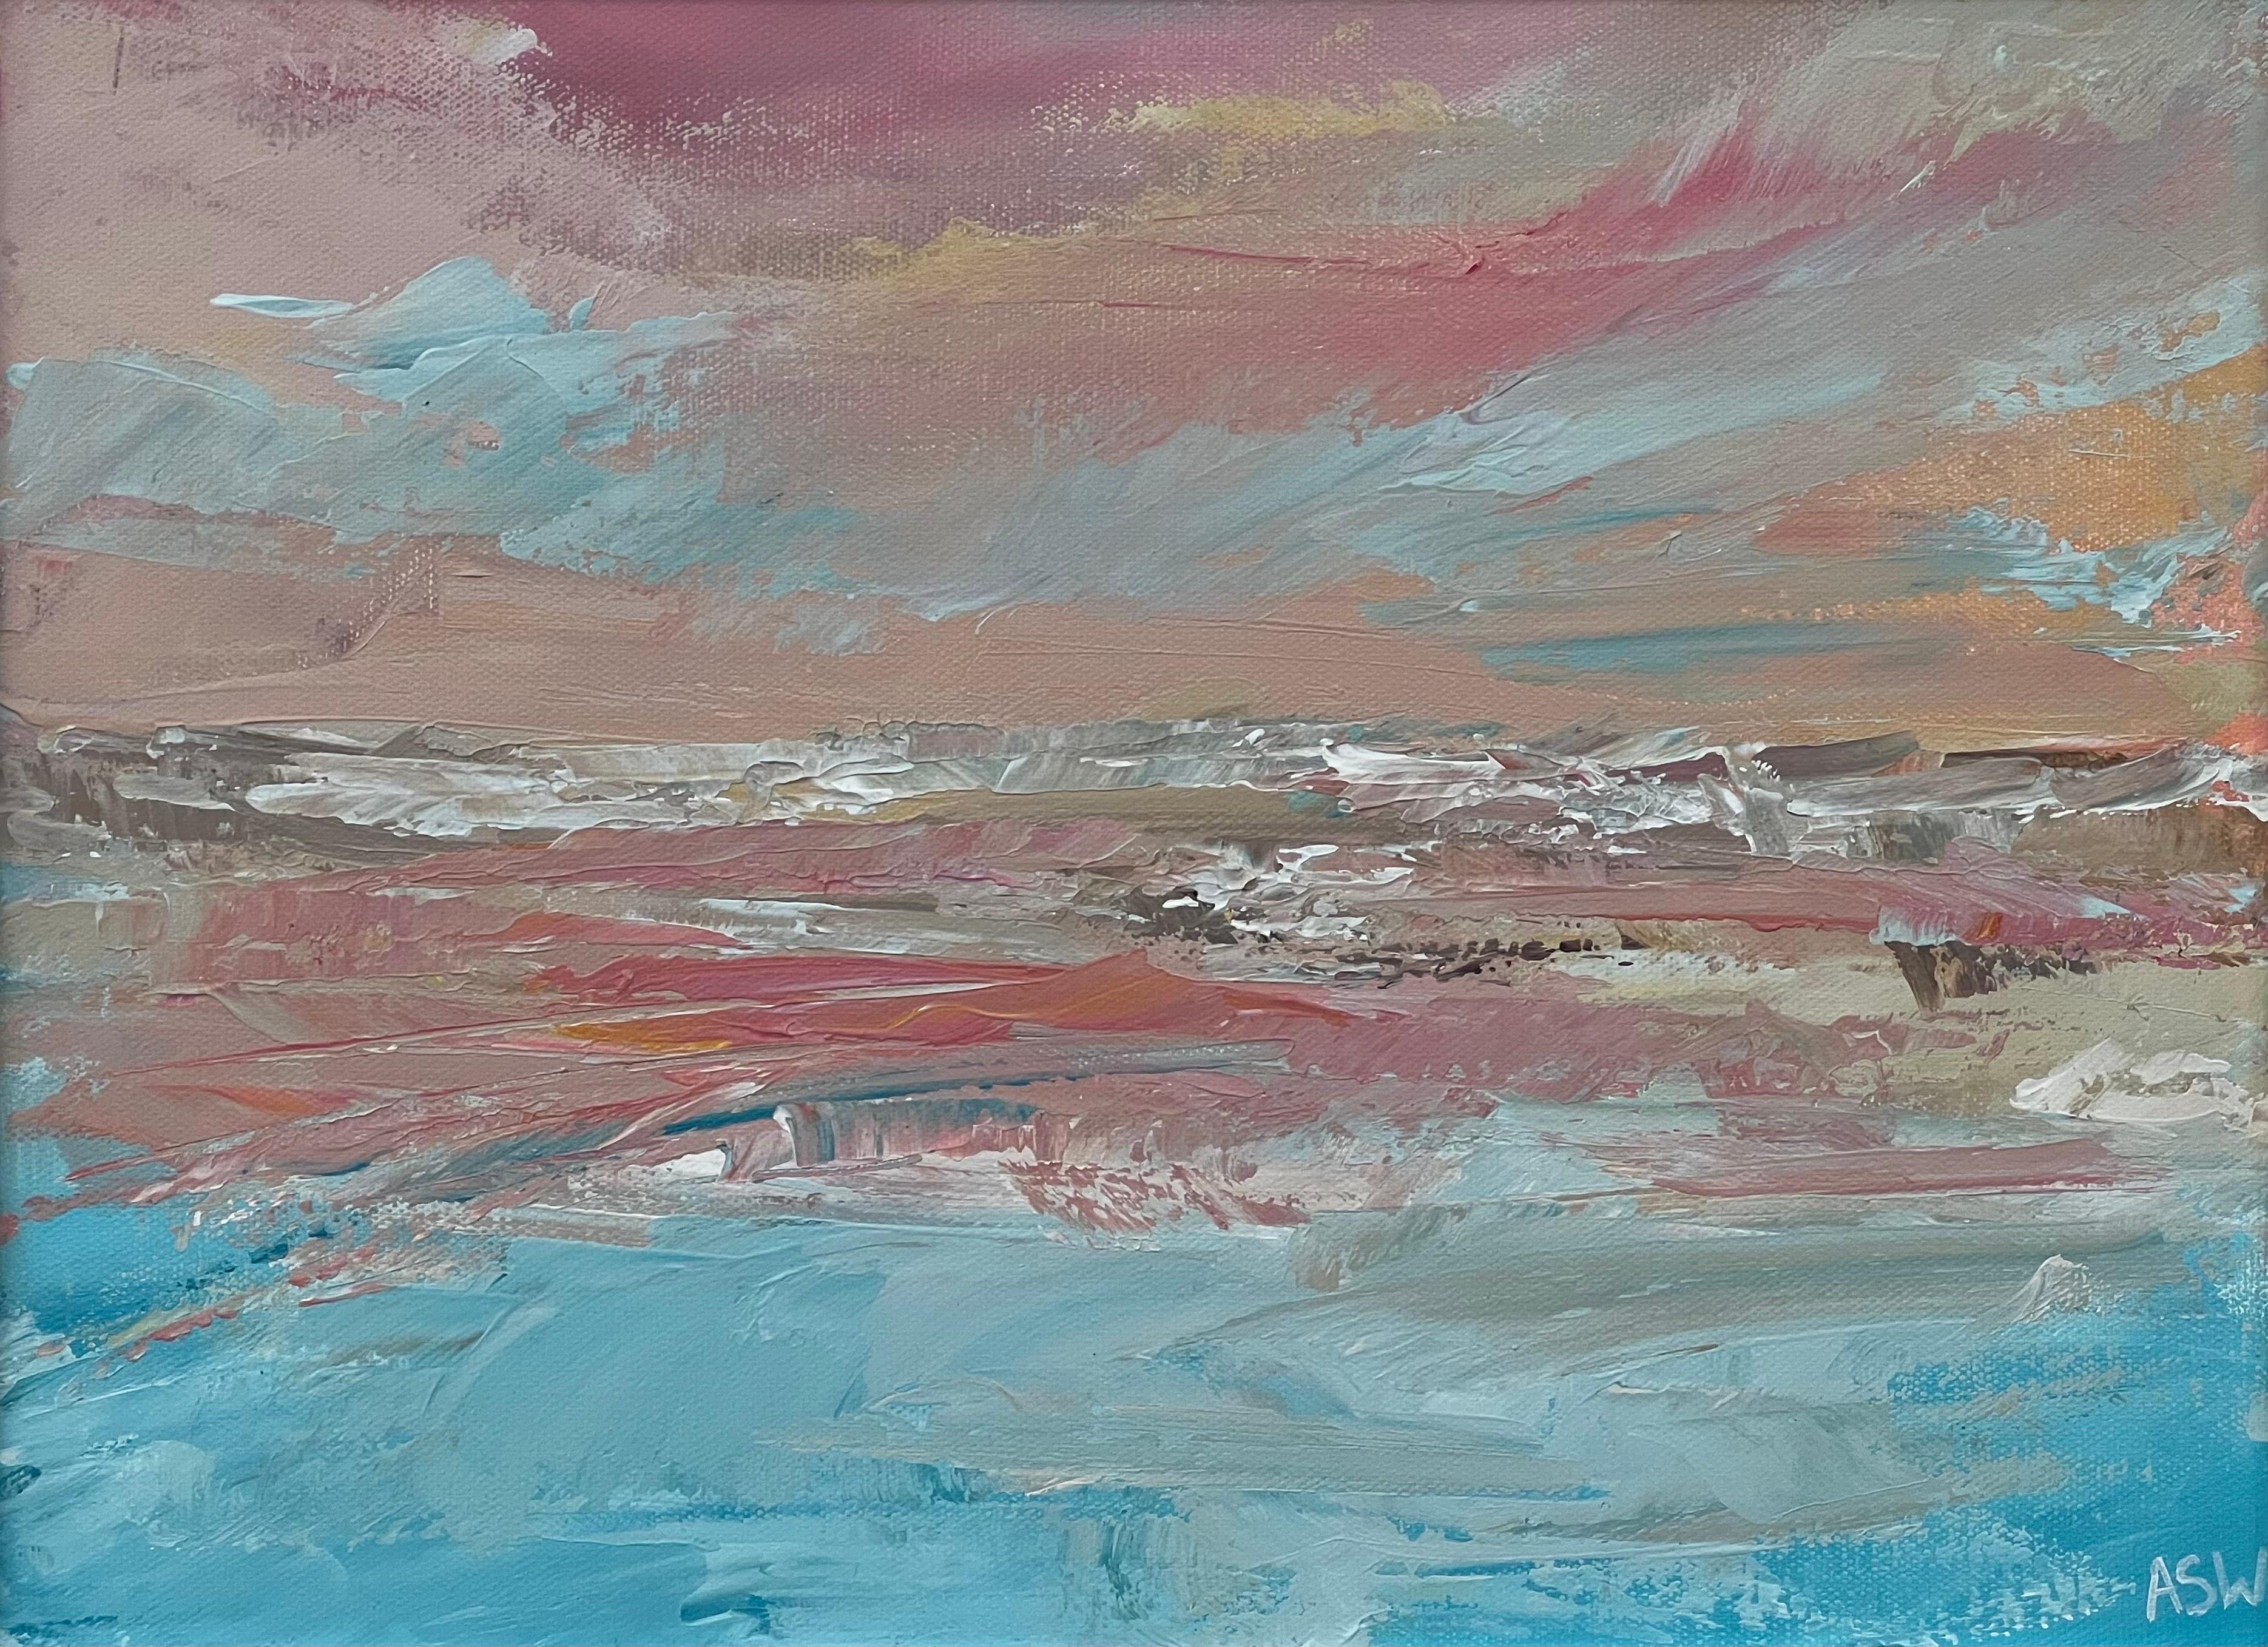  Pink & Blue Abstract Impressionist Painting by Contemporary British Artist For Sale 3